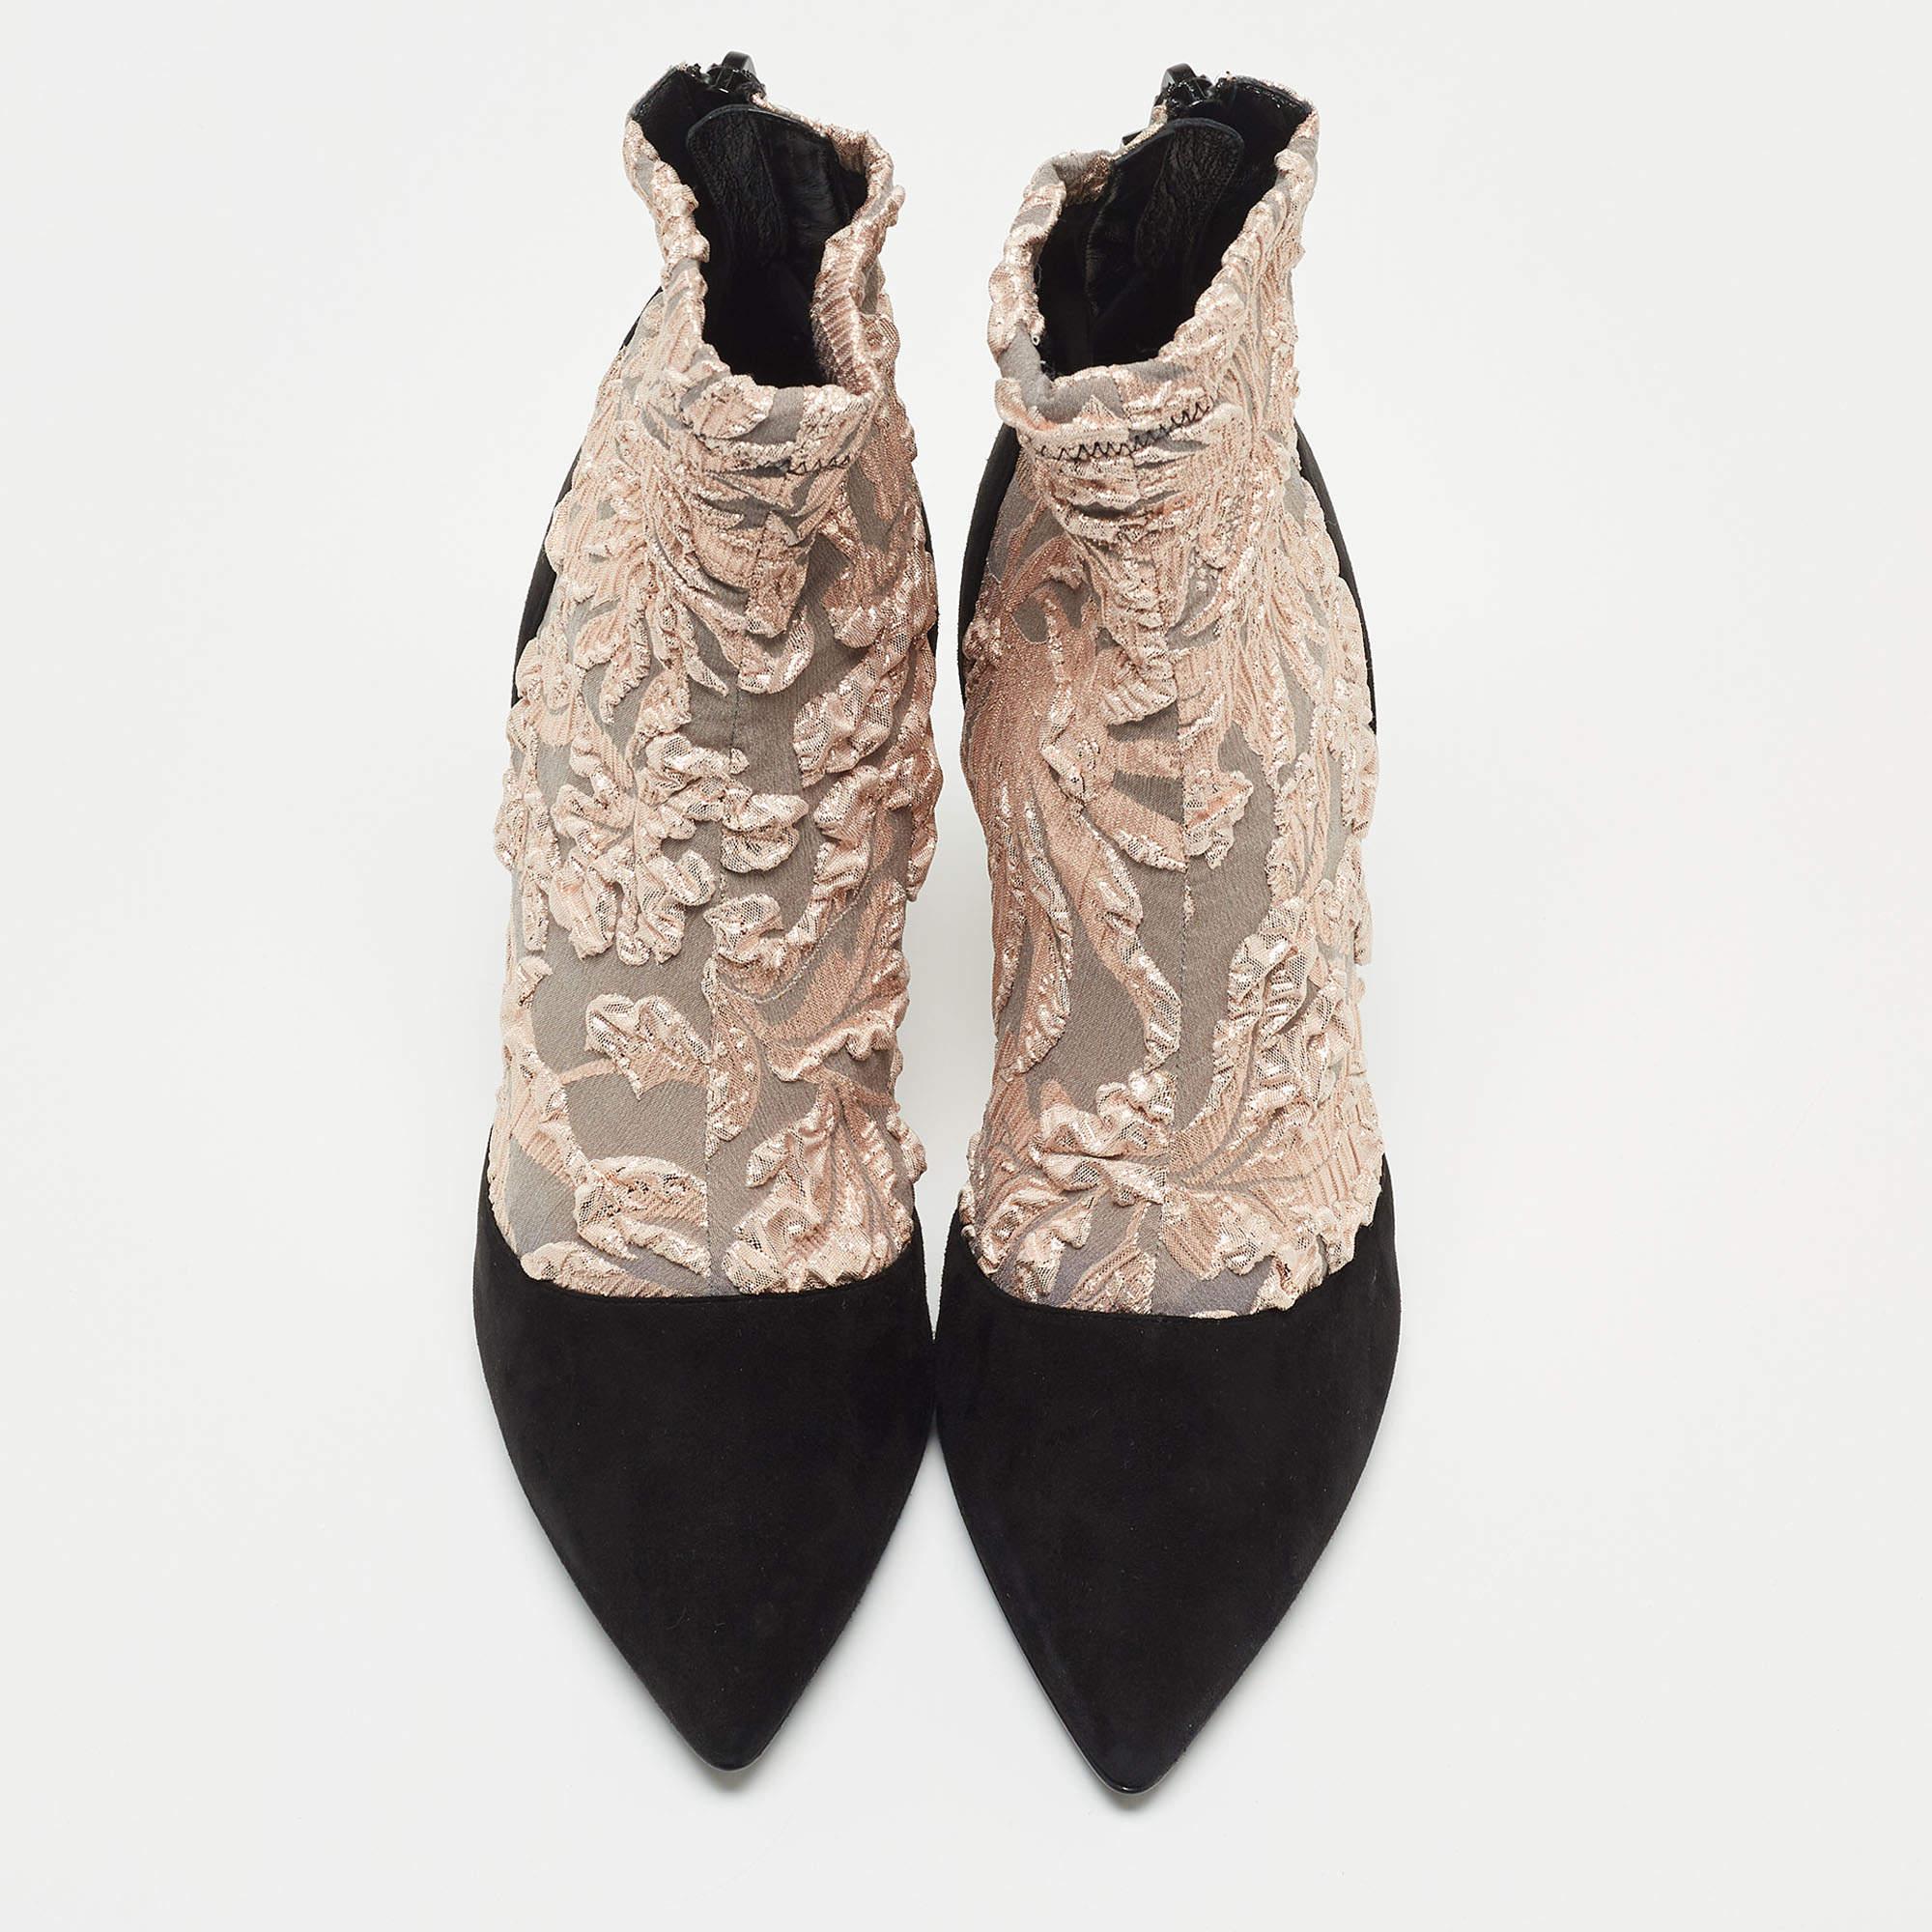 Pierre Hardy Black/Metallic Peach Fabric and Suede Dolly Pointed Toe Ankle Booti In New Condition For Sale In Dubai, Al Qouz 2